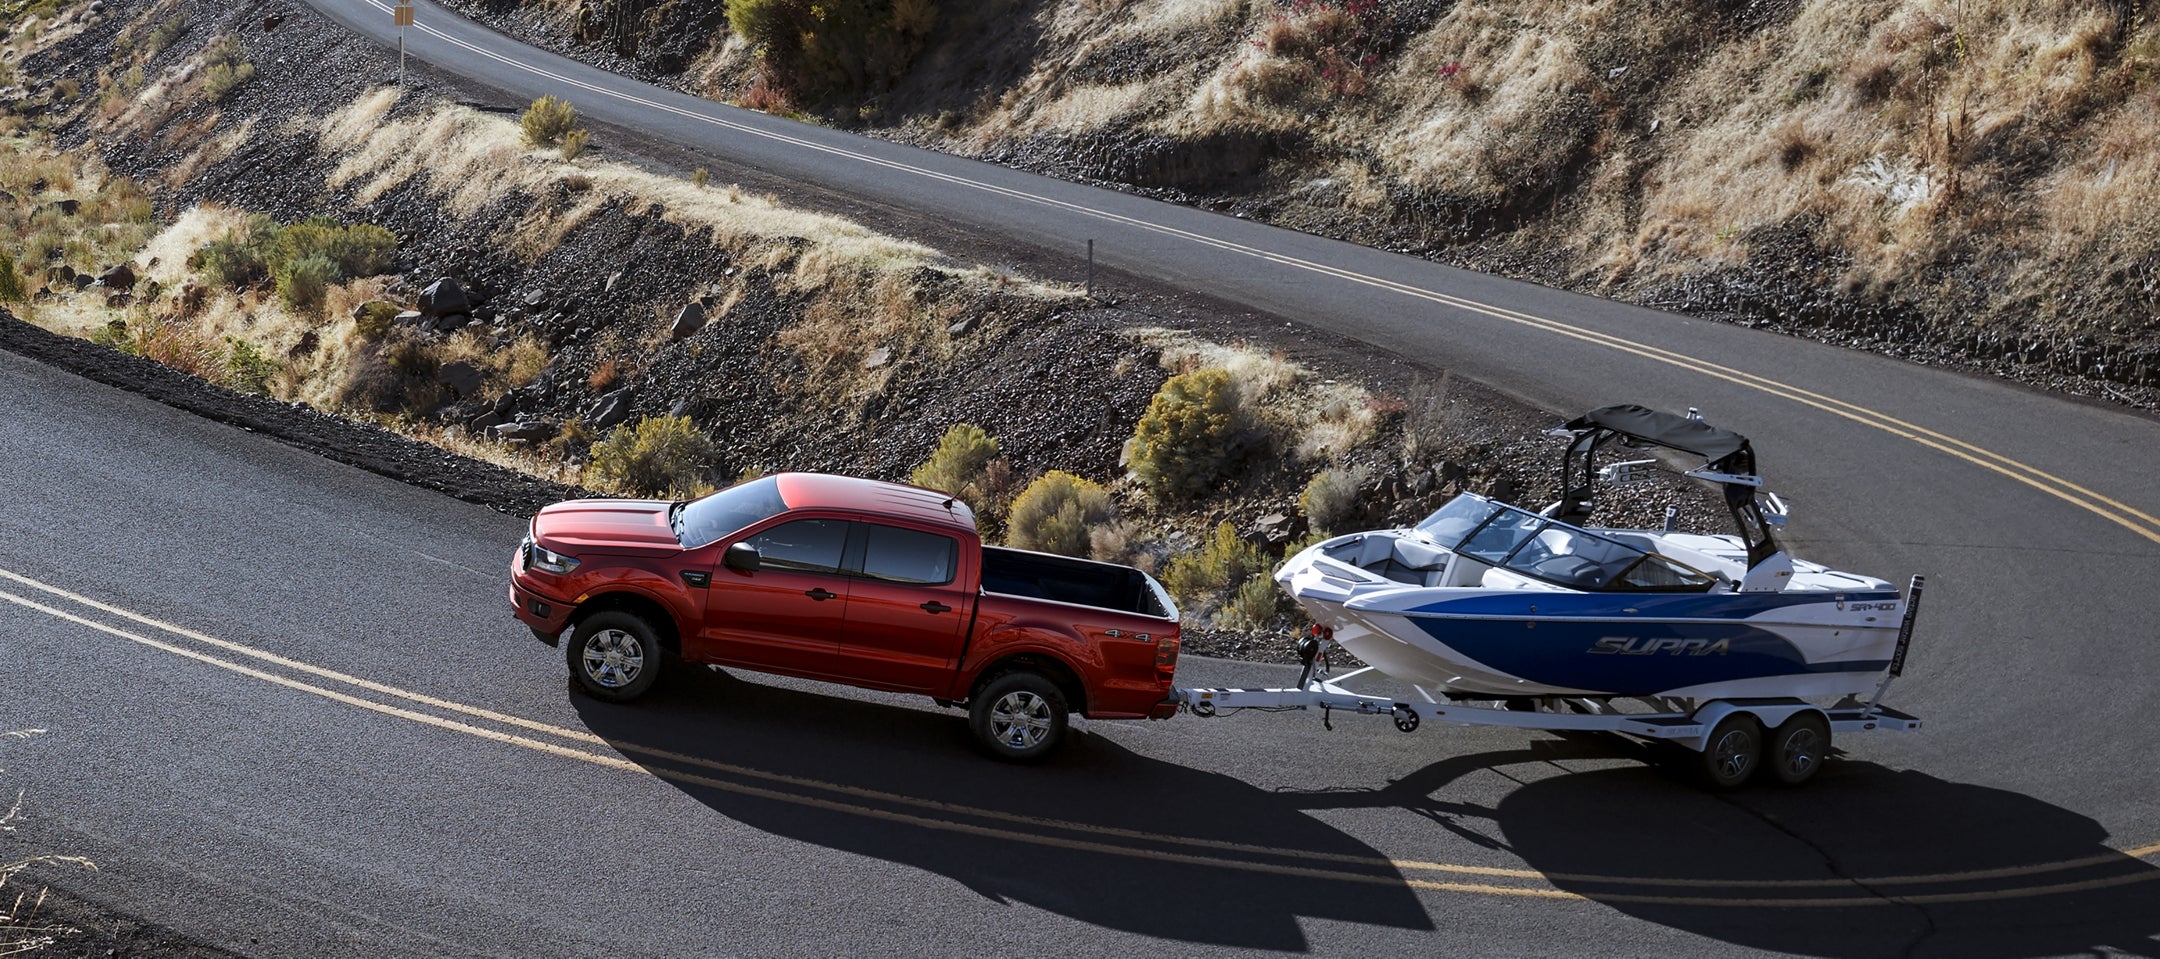 The 2019 Ranger Is Ready to Tow!